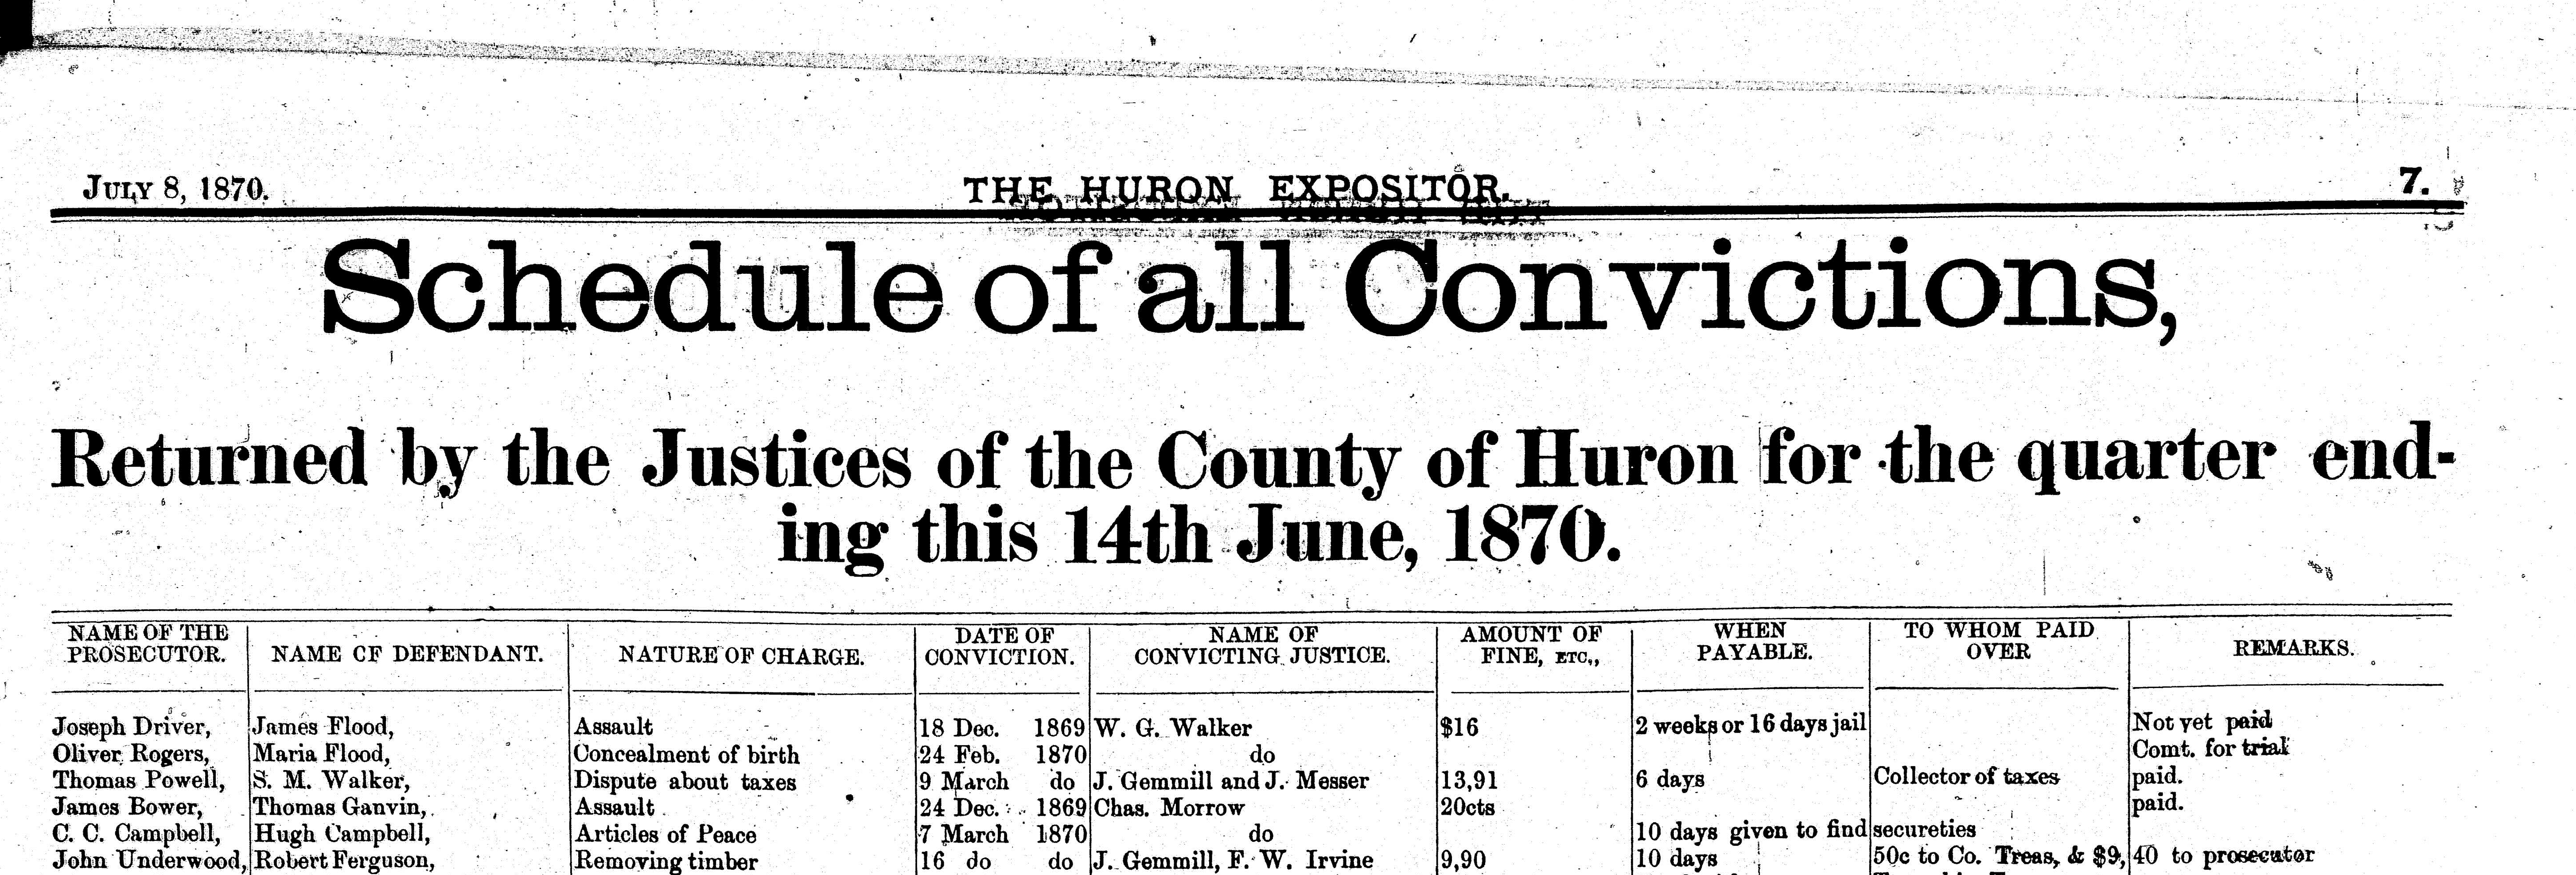 Image of newspaper clipping from 1870 Schedule of Convictions featuring prosecution of Maria Flood for “concealment of birth.” The Huron Expositor, 07/08/1870, pg 1. 